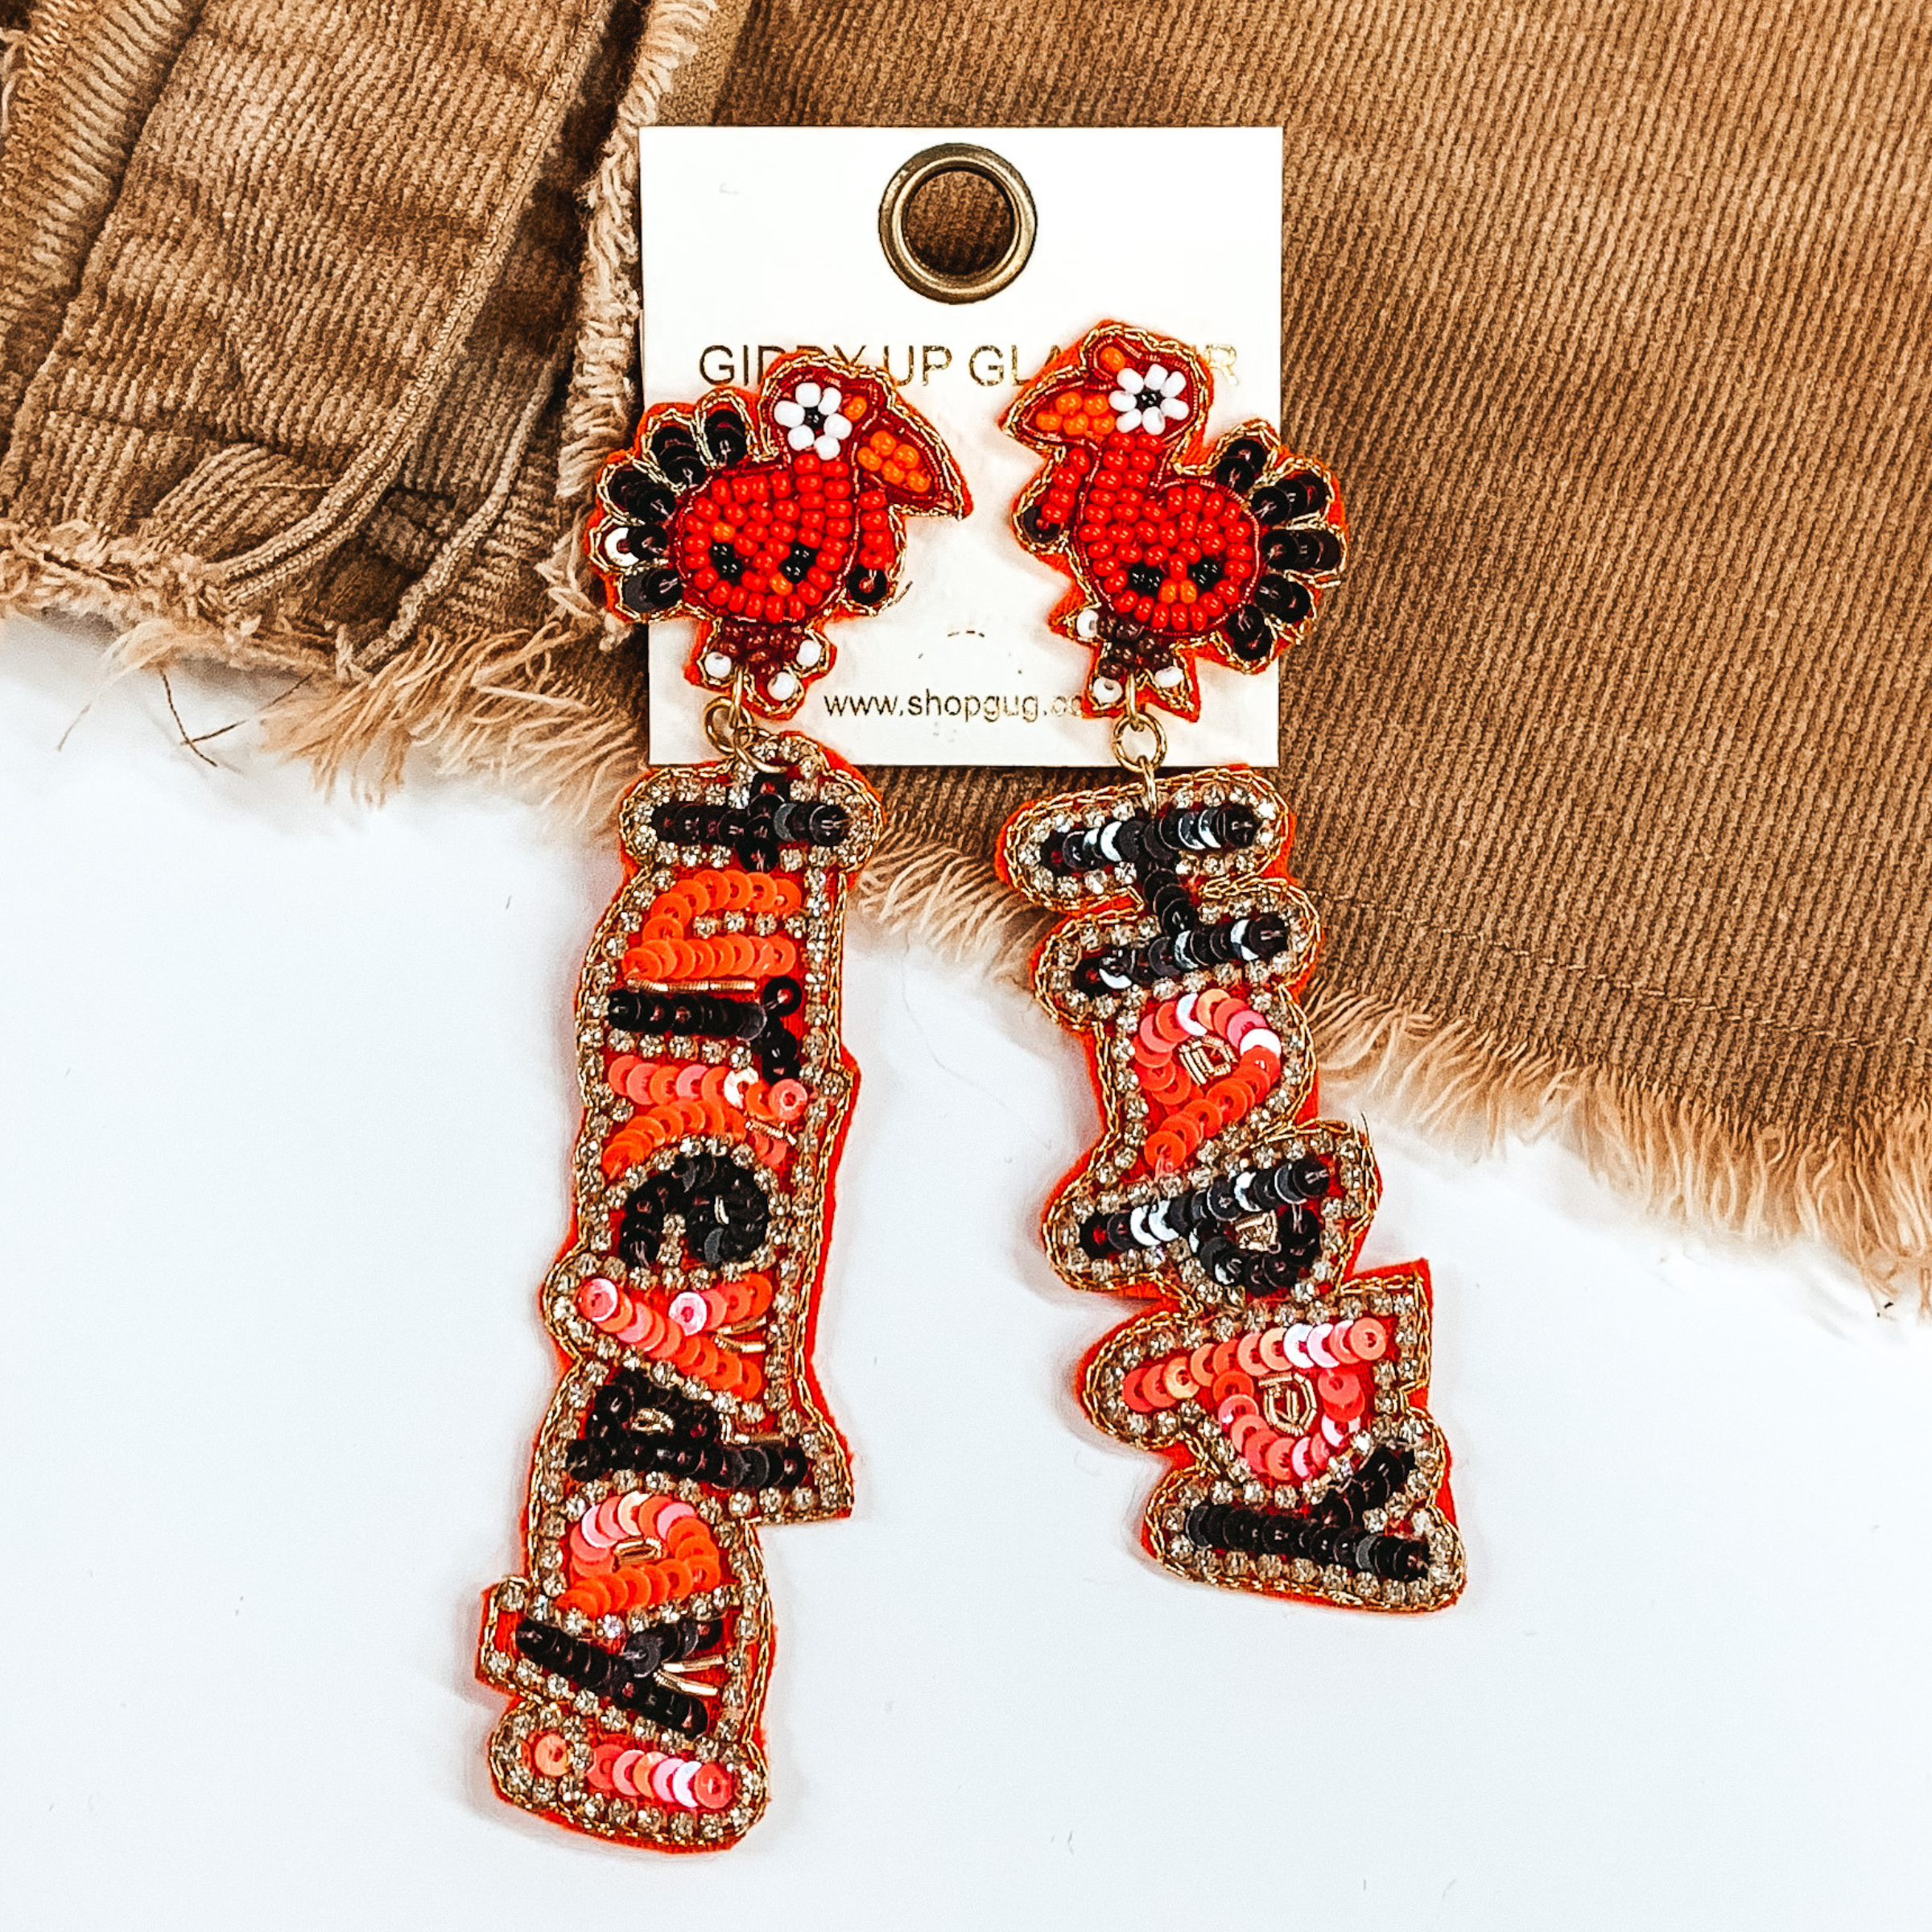 Happy Turkey Day Beaded Earrings in Orange and Dark Brown - Giddy Up Glamour Boutique